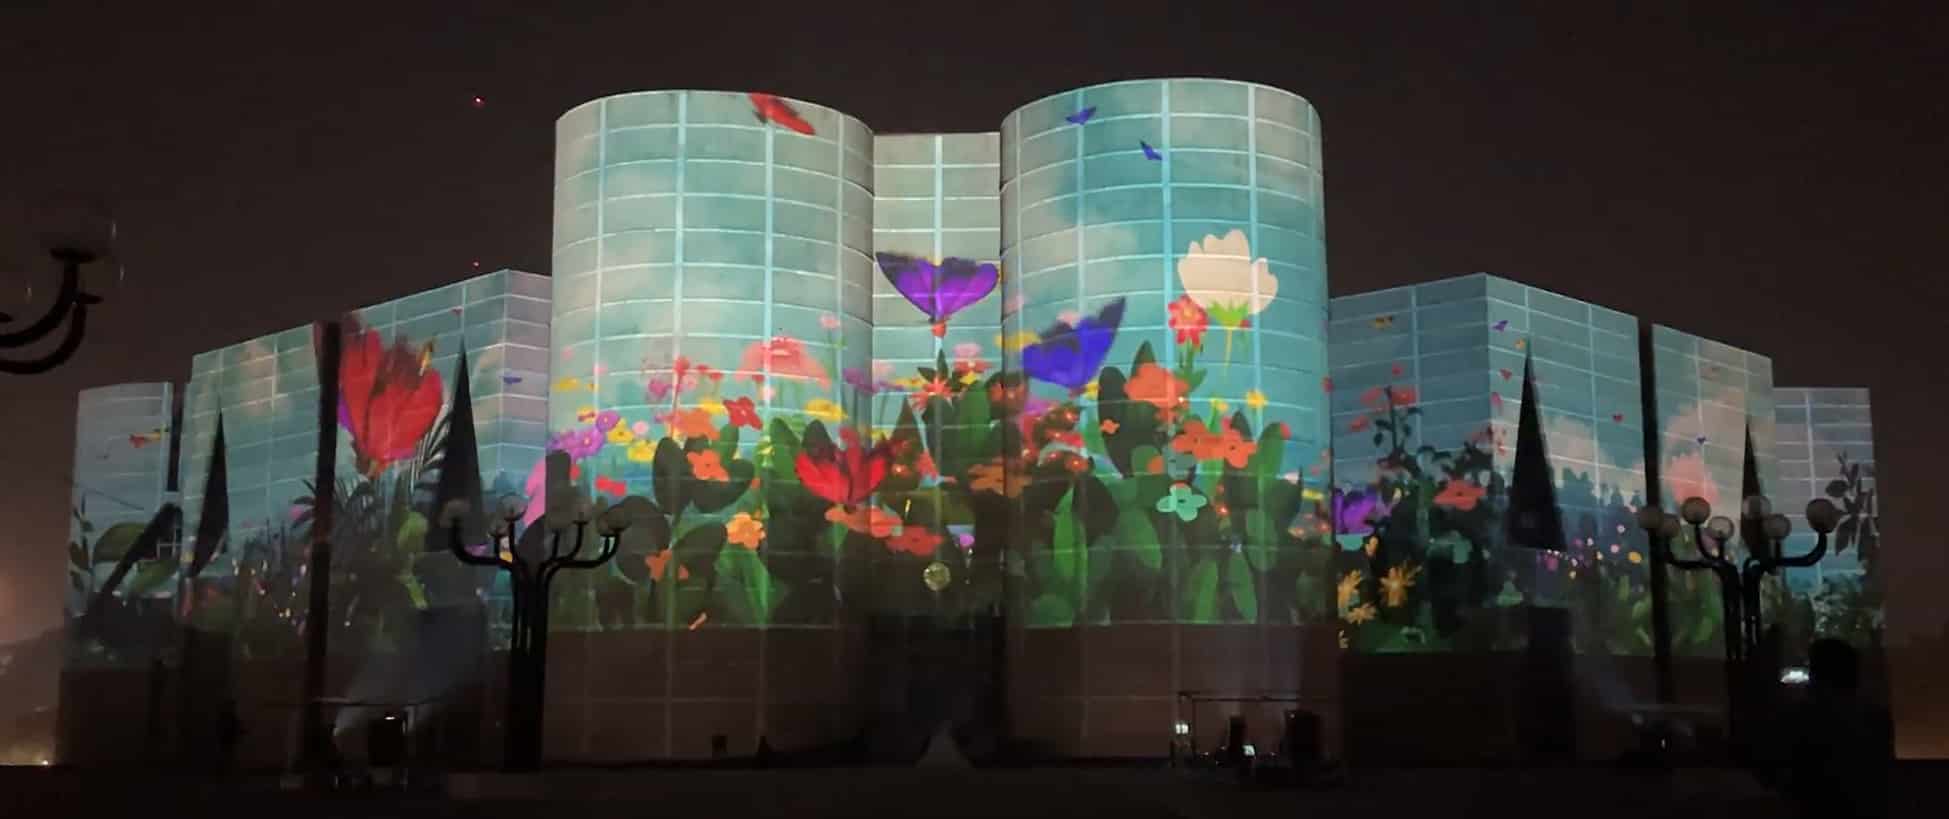 AV Spectrum deploys tech-savvy infrastructure to enable a stunning projection mapping display